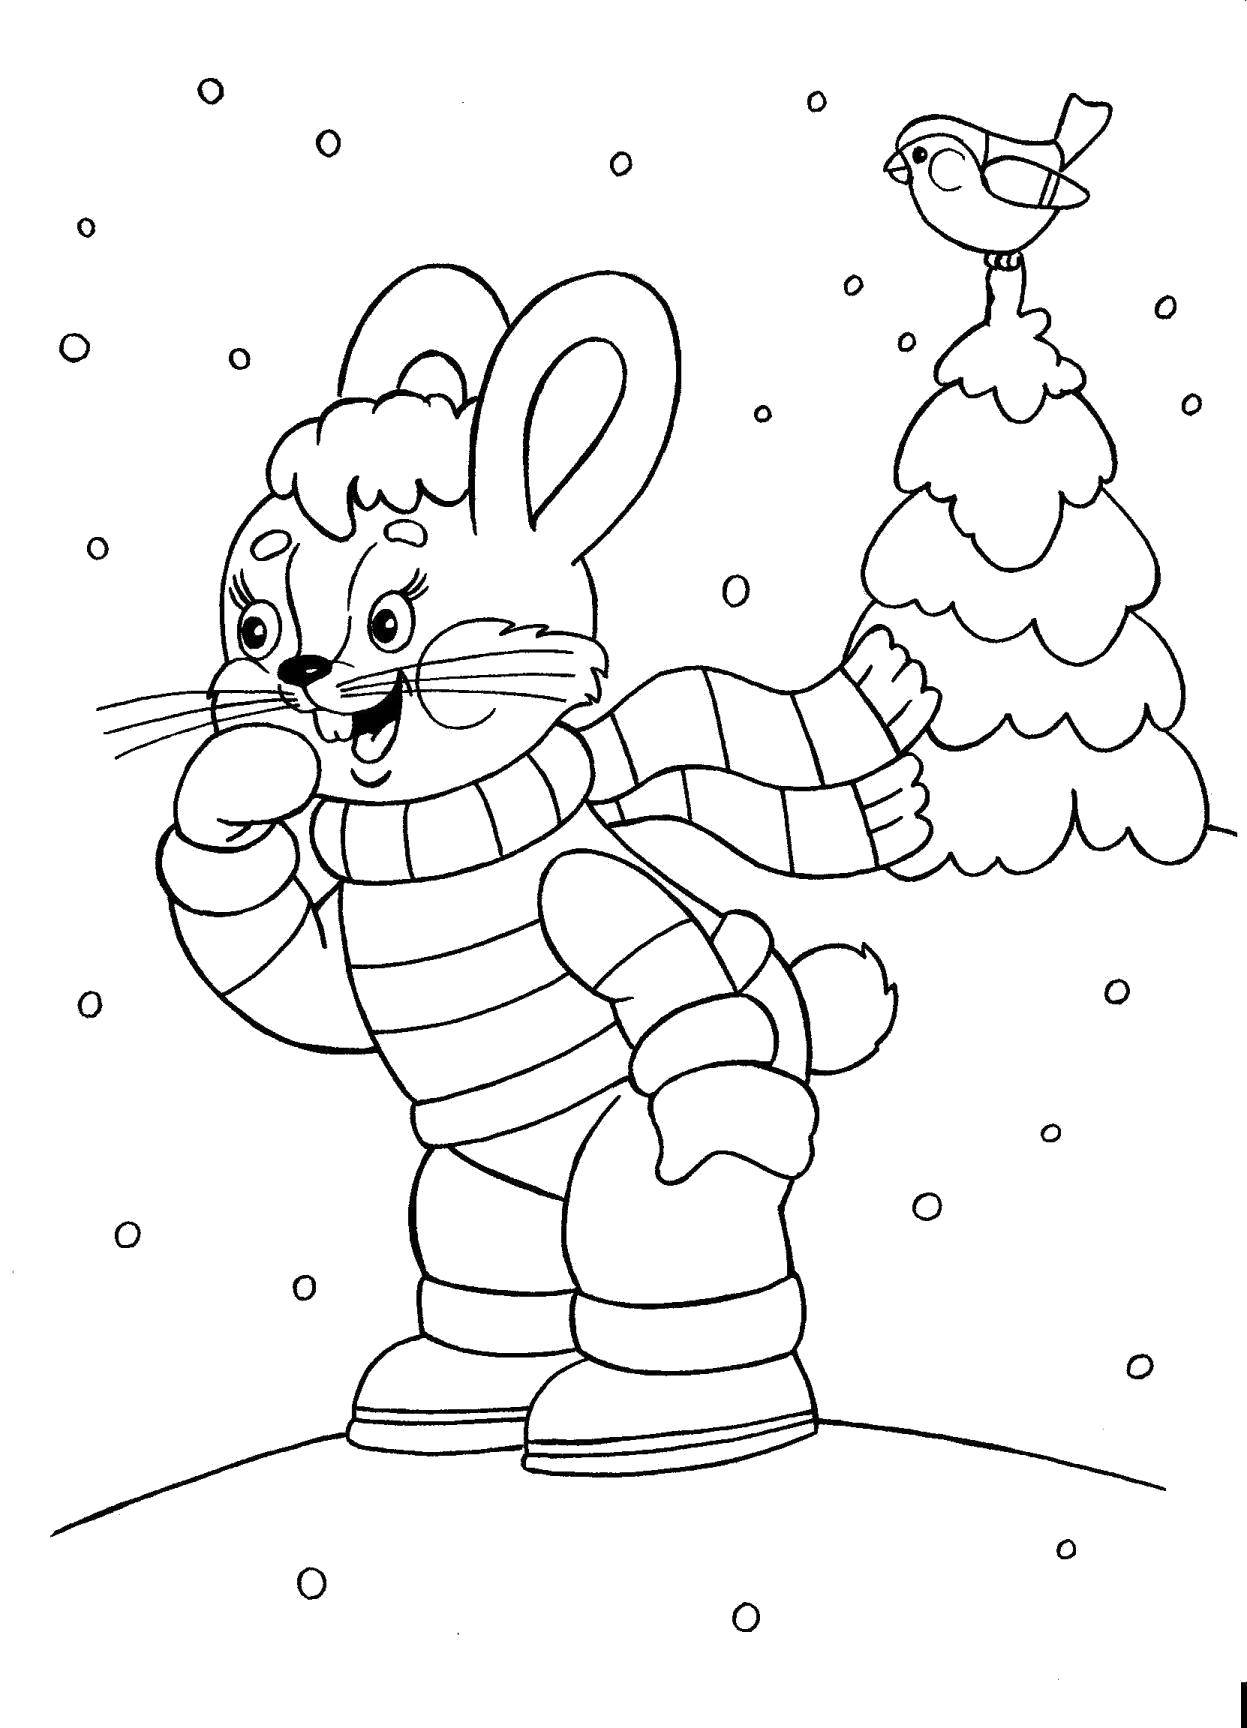 Coloring Bunny in winter. Category winter. Tags:  Winter, forest, Bunny.